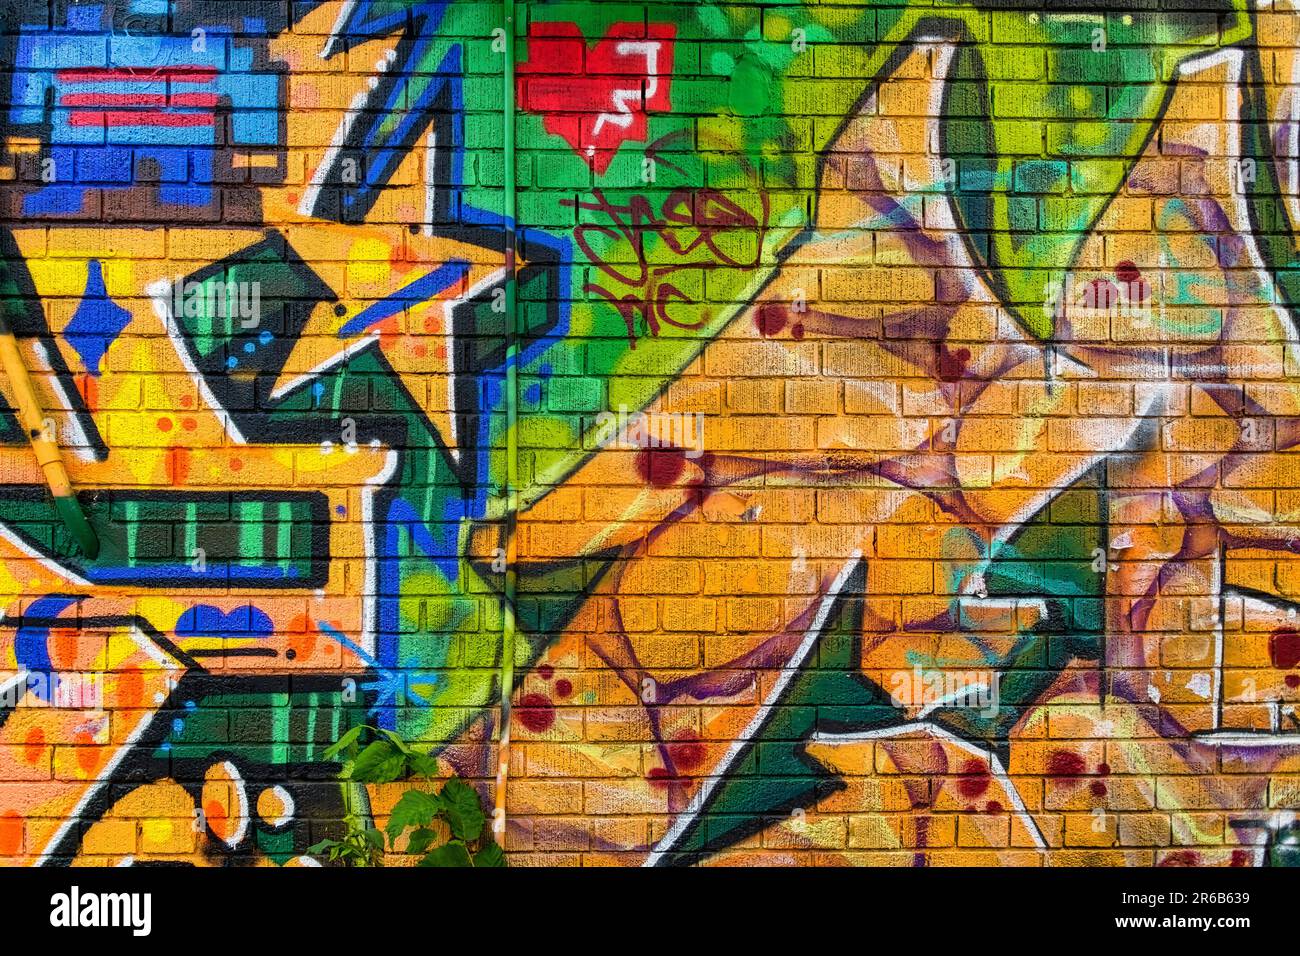 Toronto, Canada - June 4, 2023:  Kensington Market.  Colorful exterior wall art on a brick wall. No people are in the scene. Stock Photo